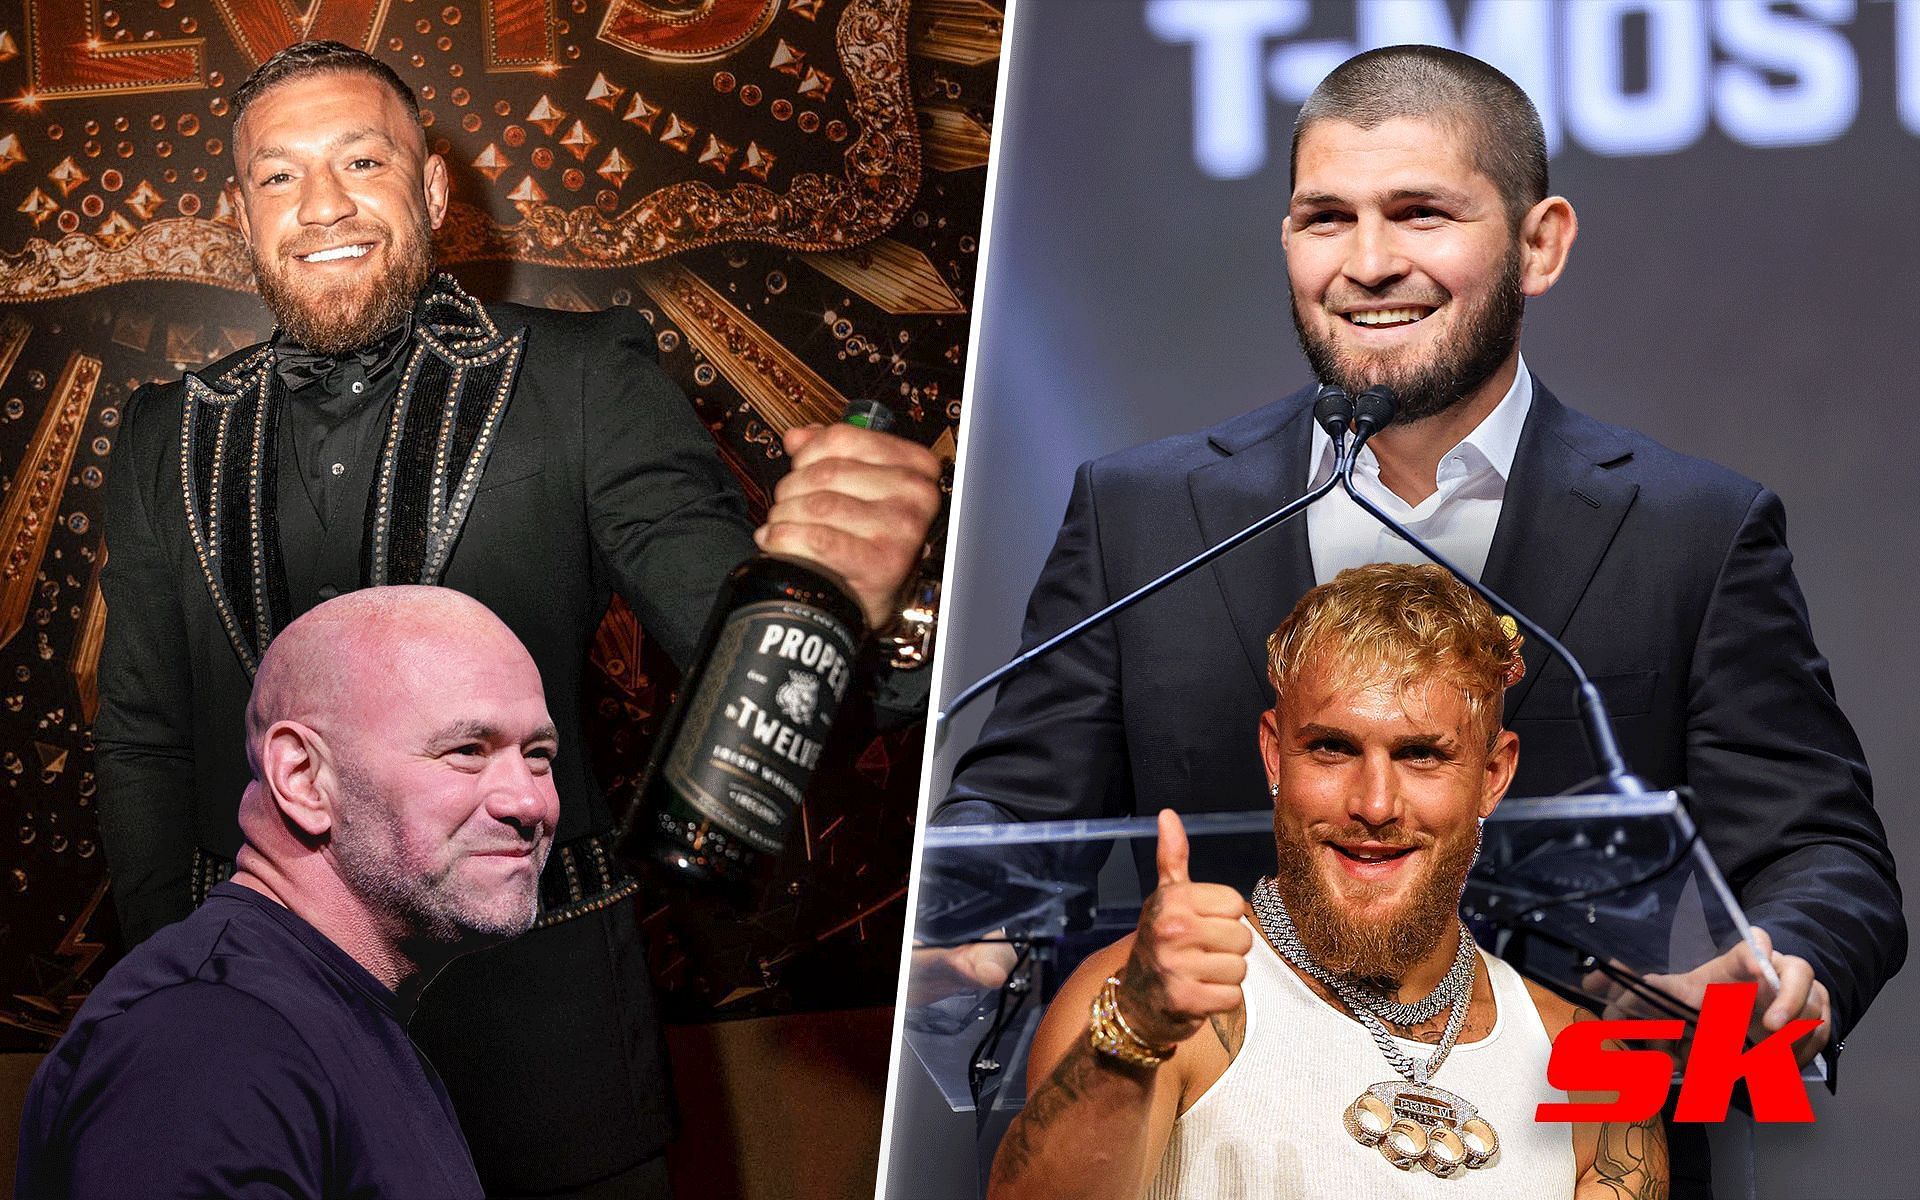 What if UFC rivals played Secret Santa? [Images via: @thenotoriousmma on Instagram]